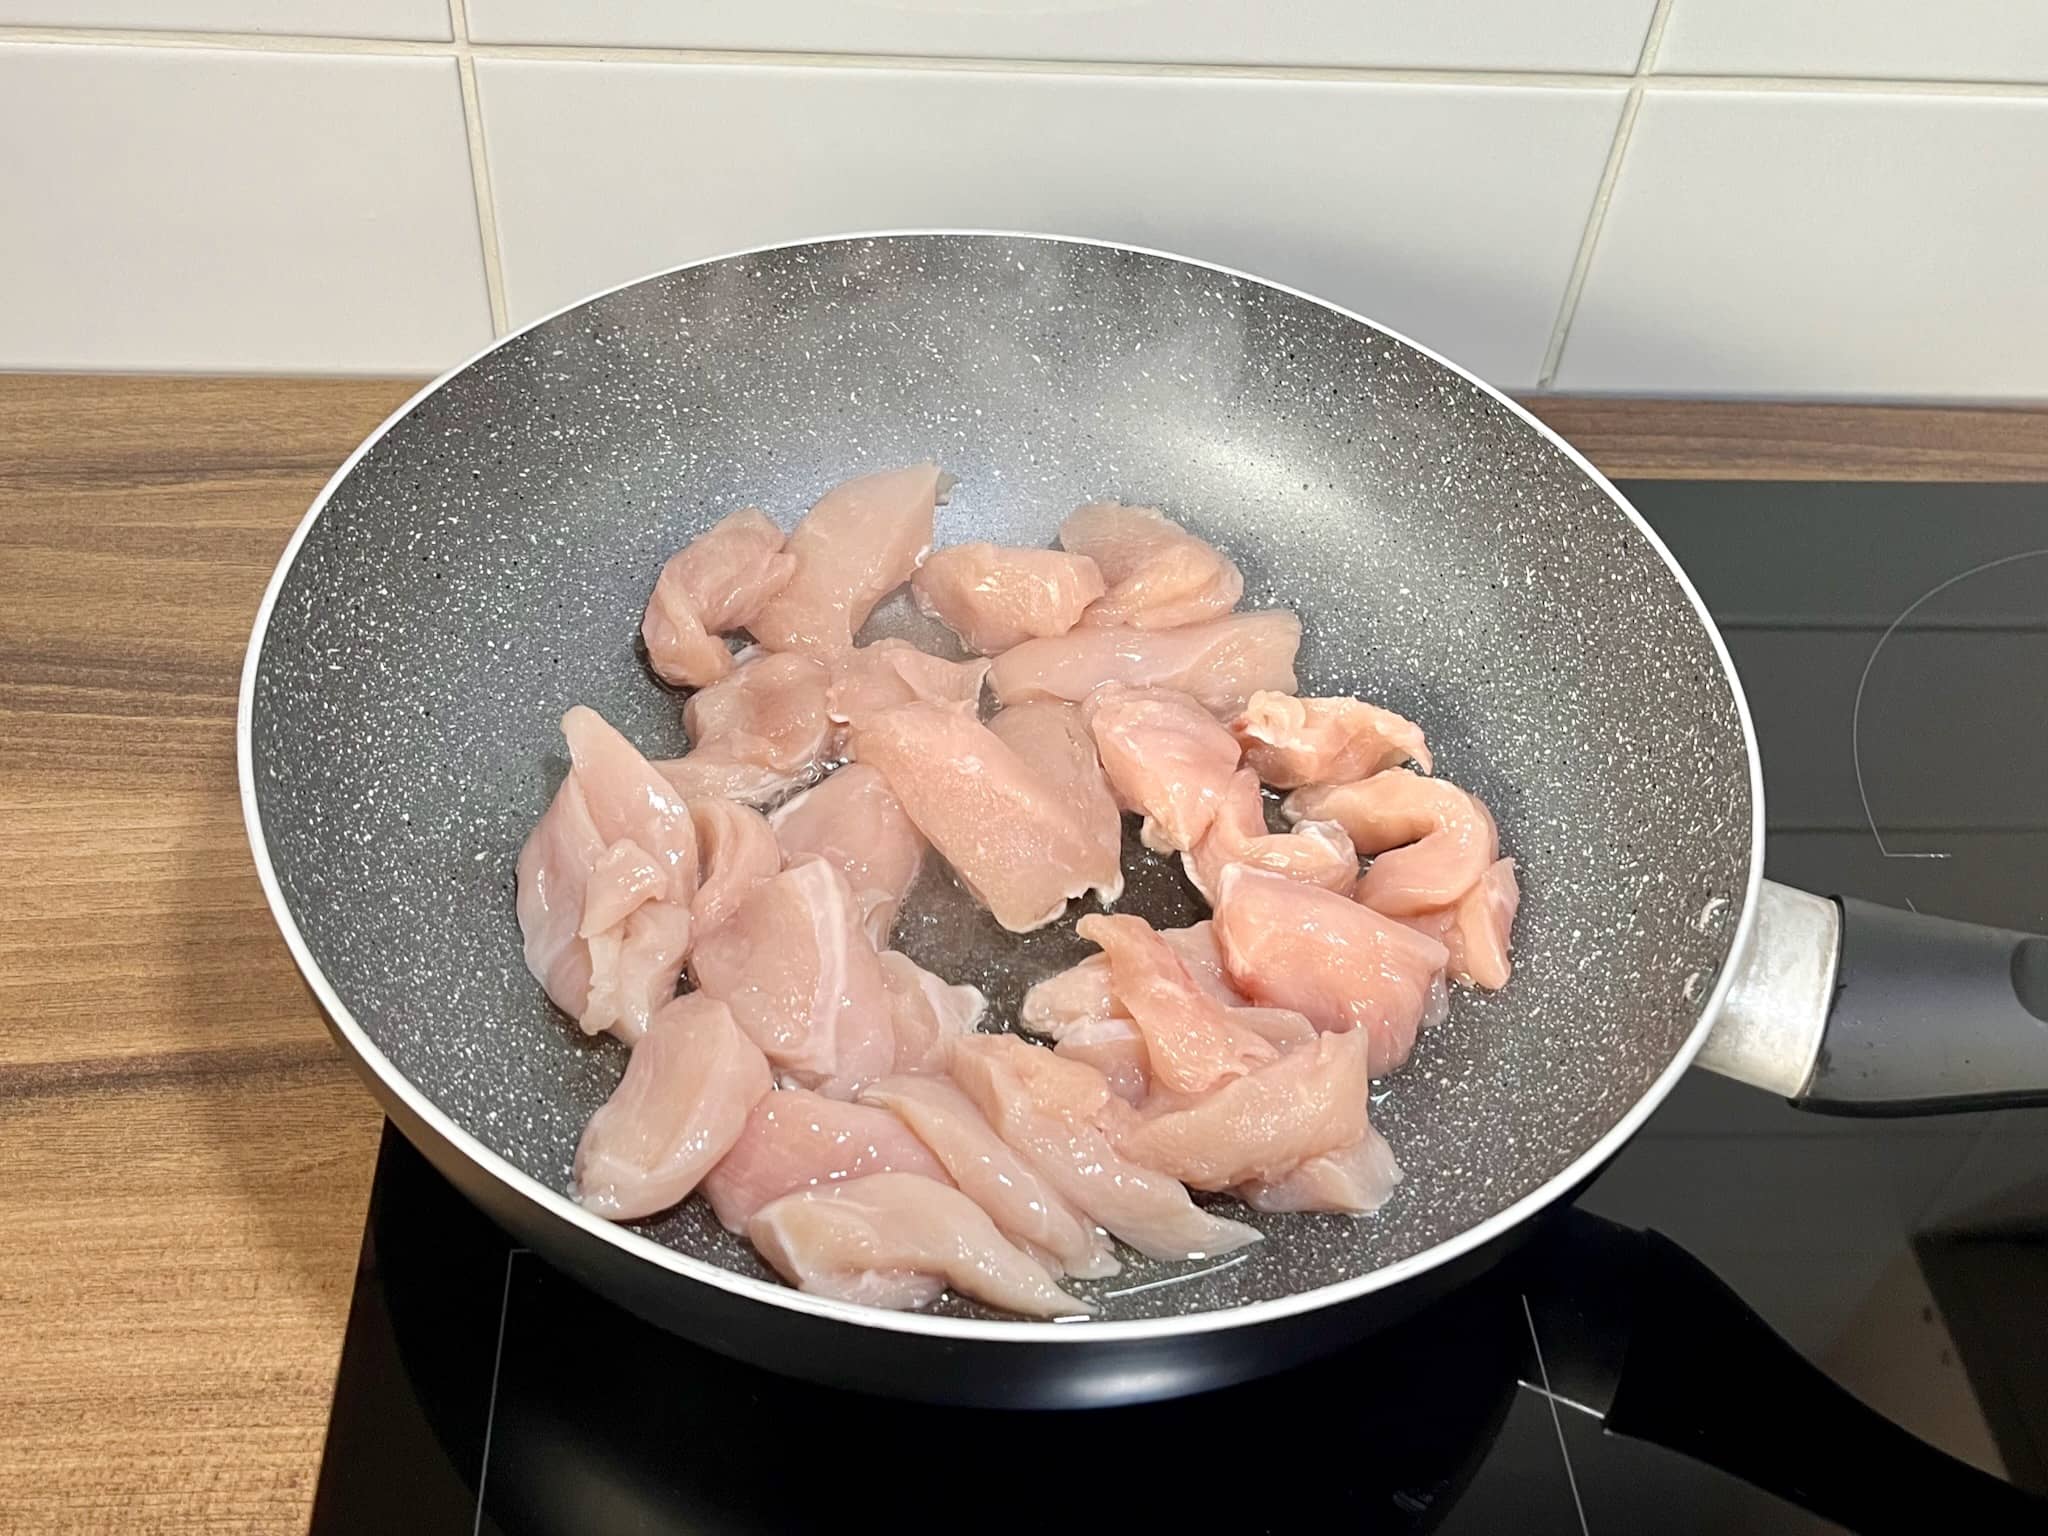 Diced chicken breasts fried in a pan